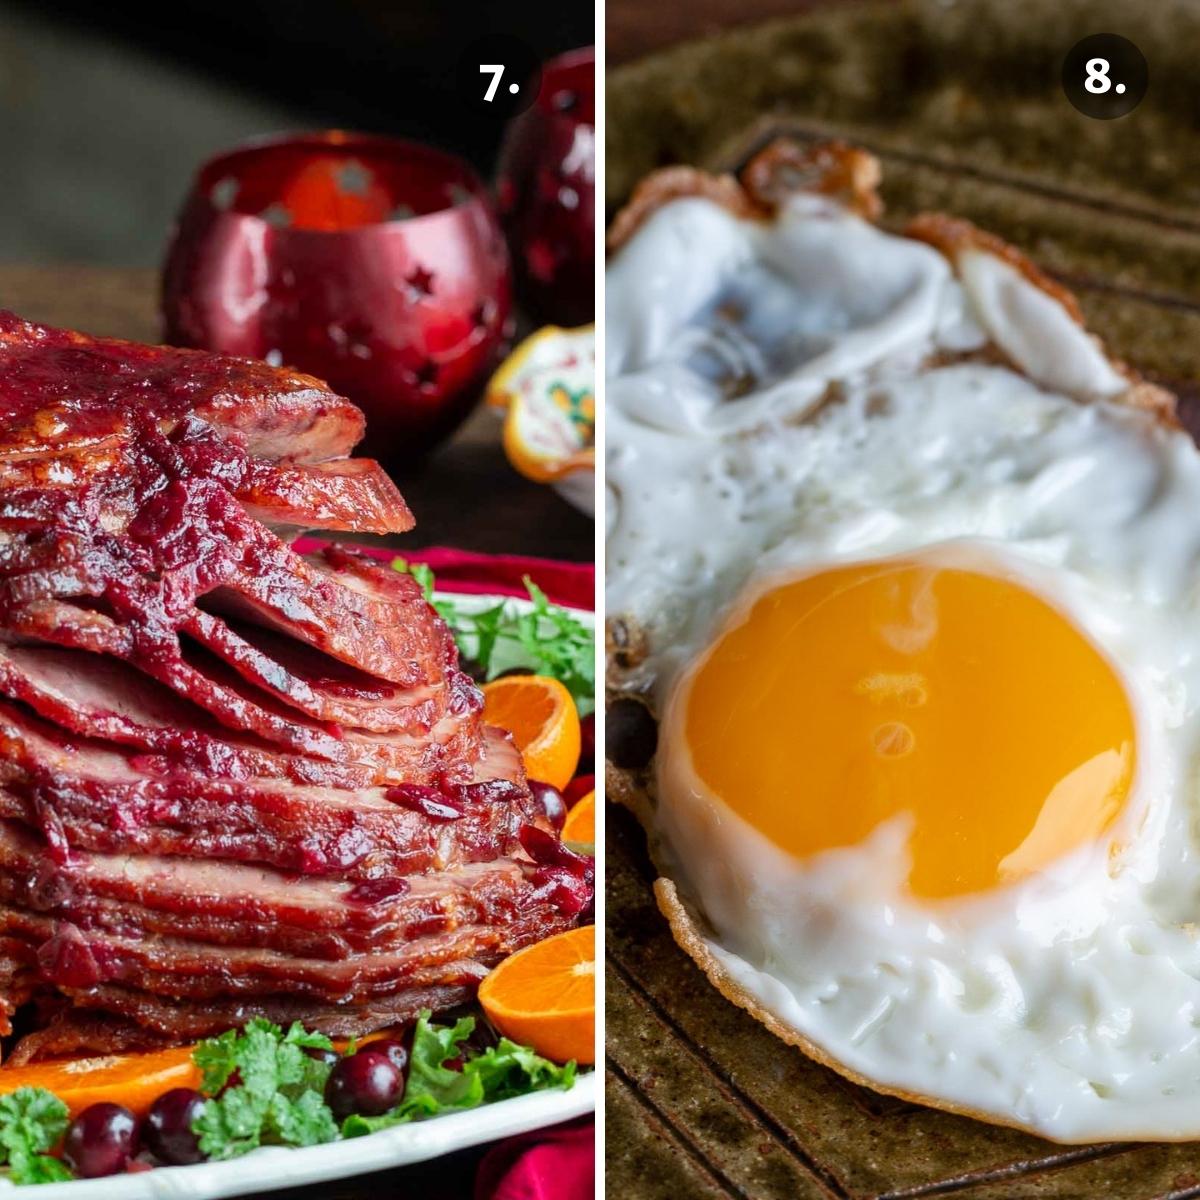 A holiday ham on the left and a fried egg on the right.